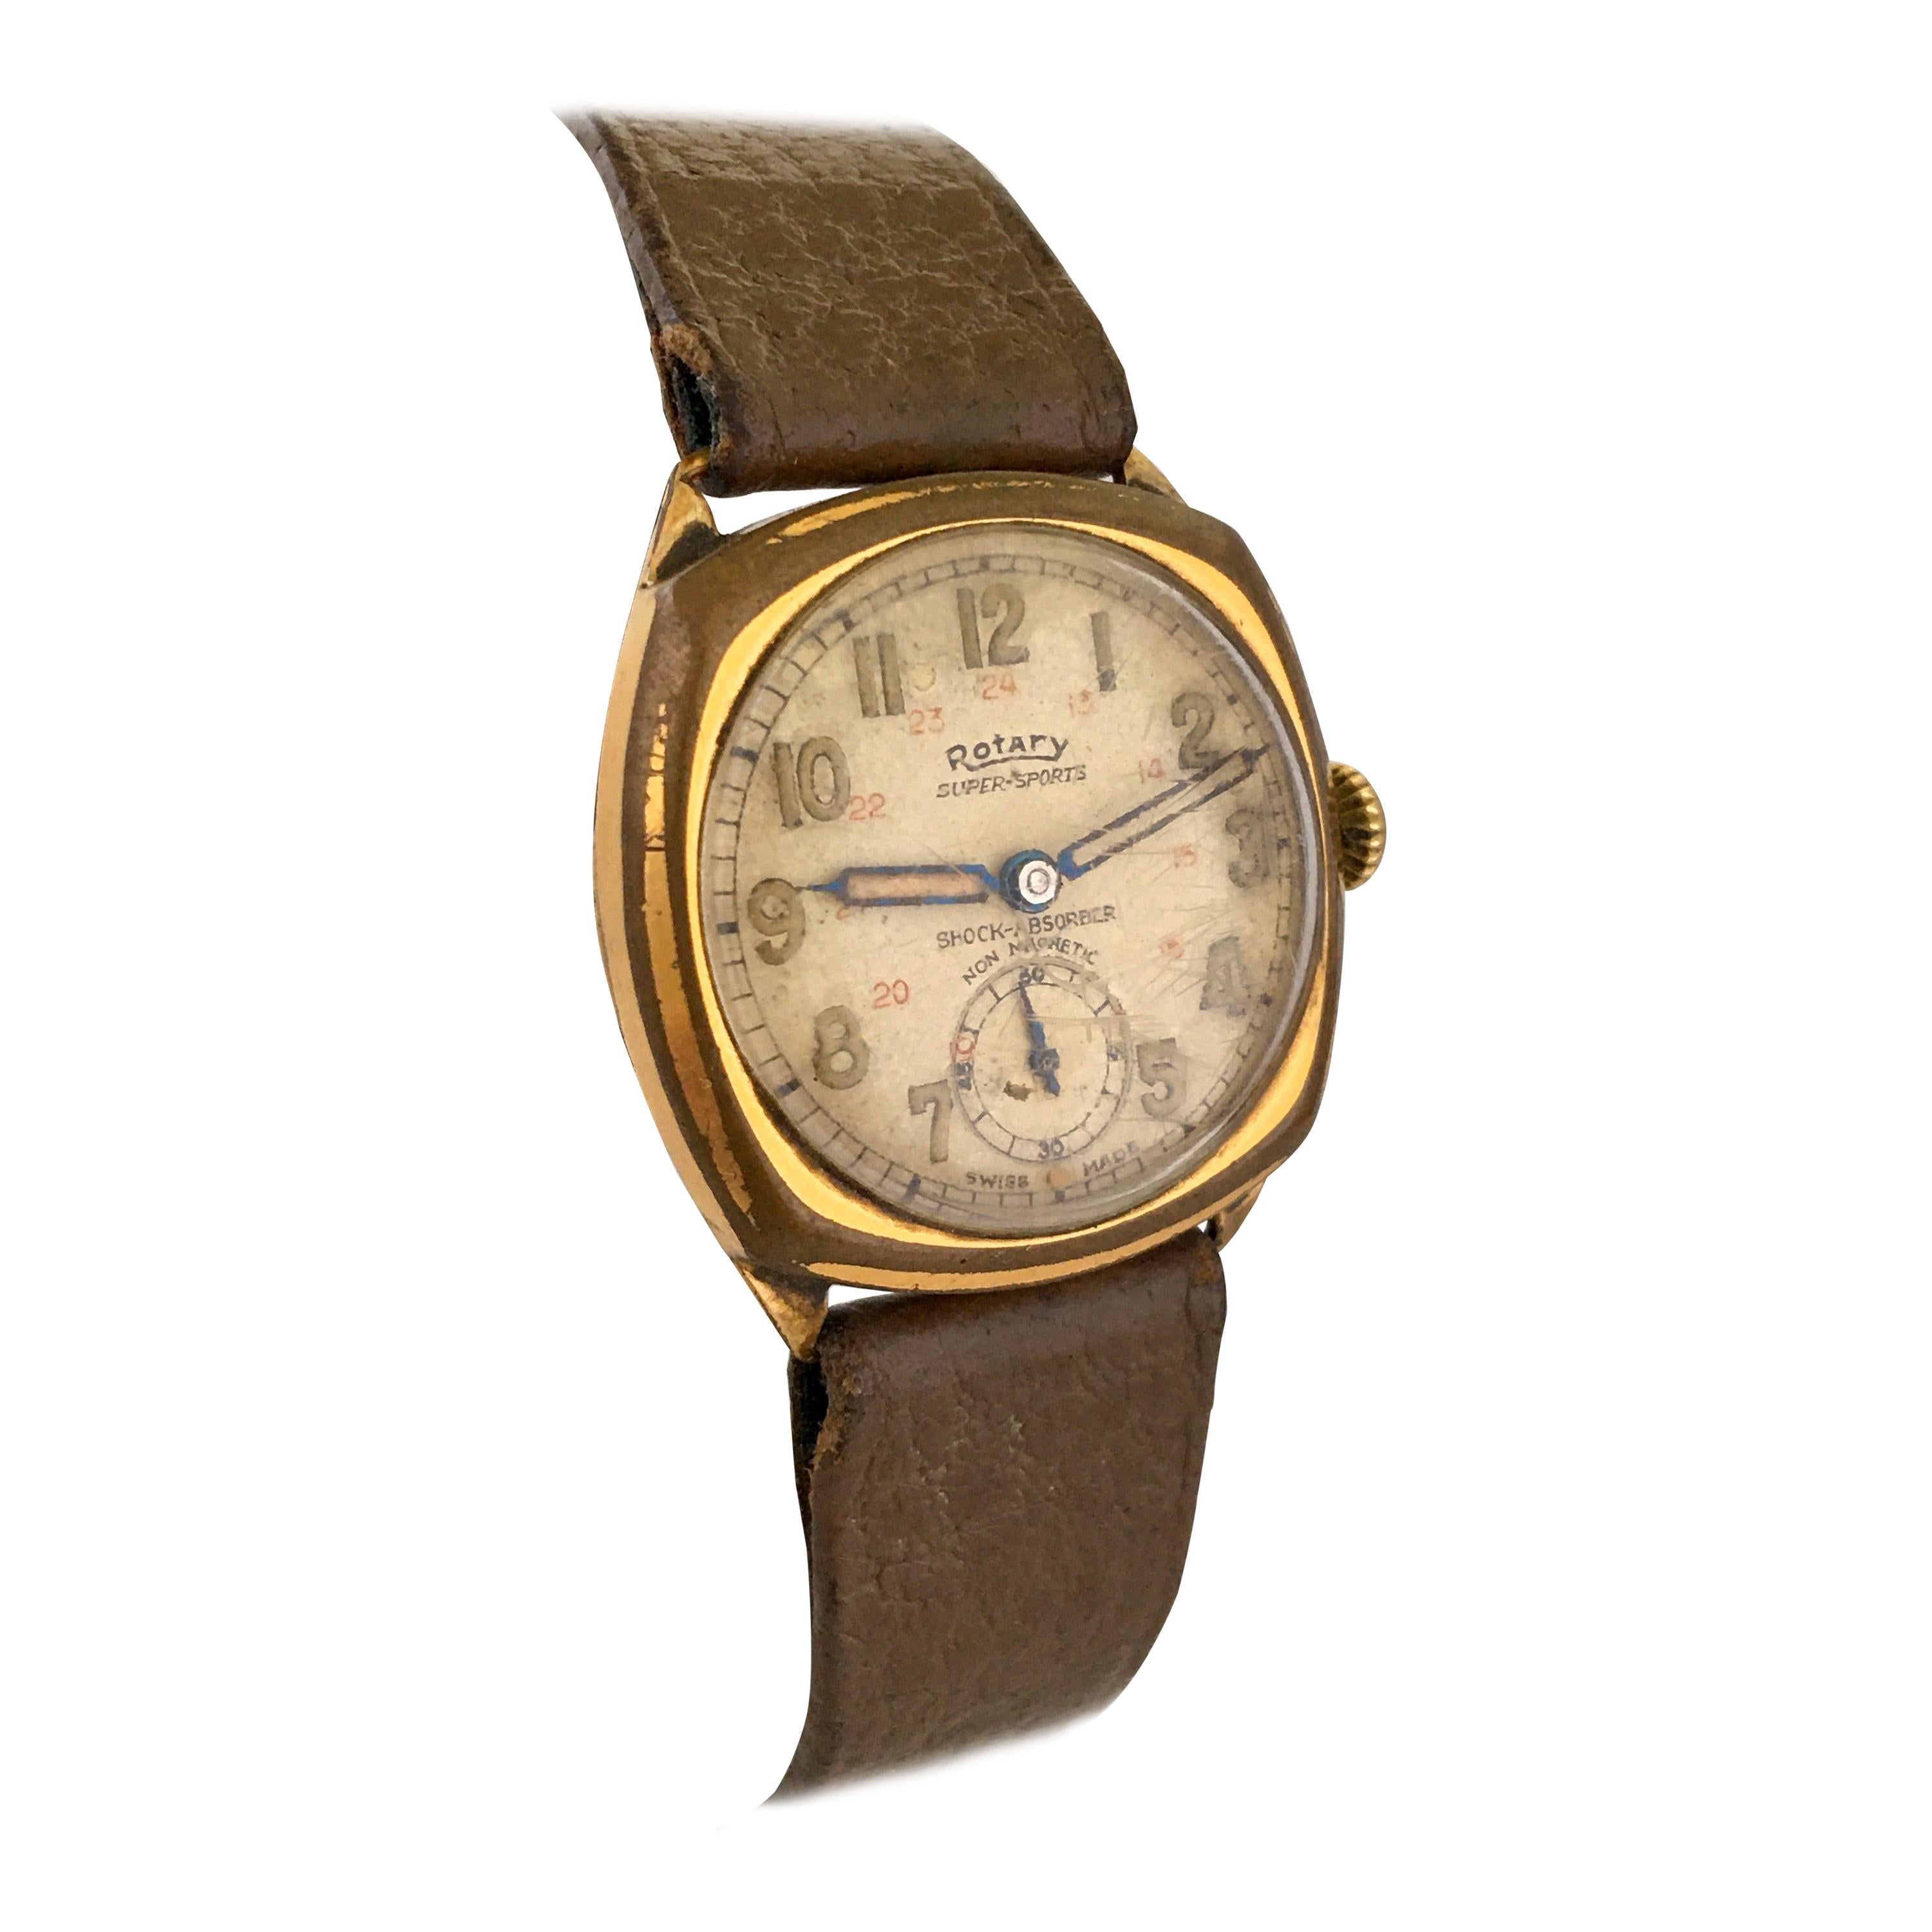 1930s Vintage Rotary24 Super Sports Gold-Plated Cushion Military Watch